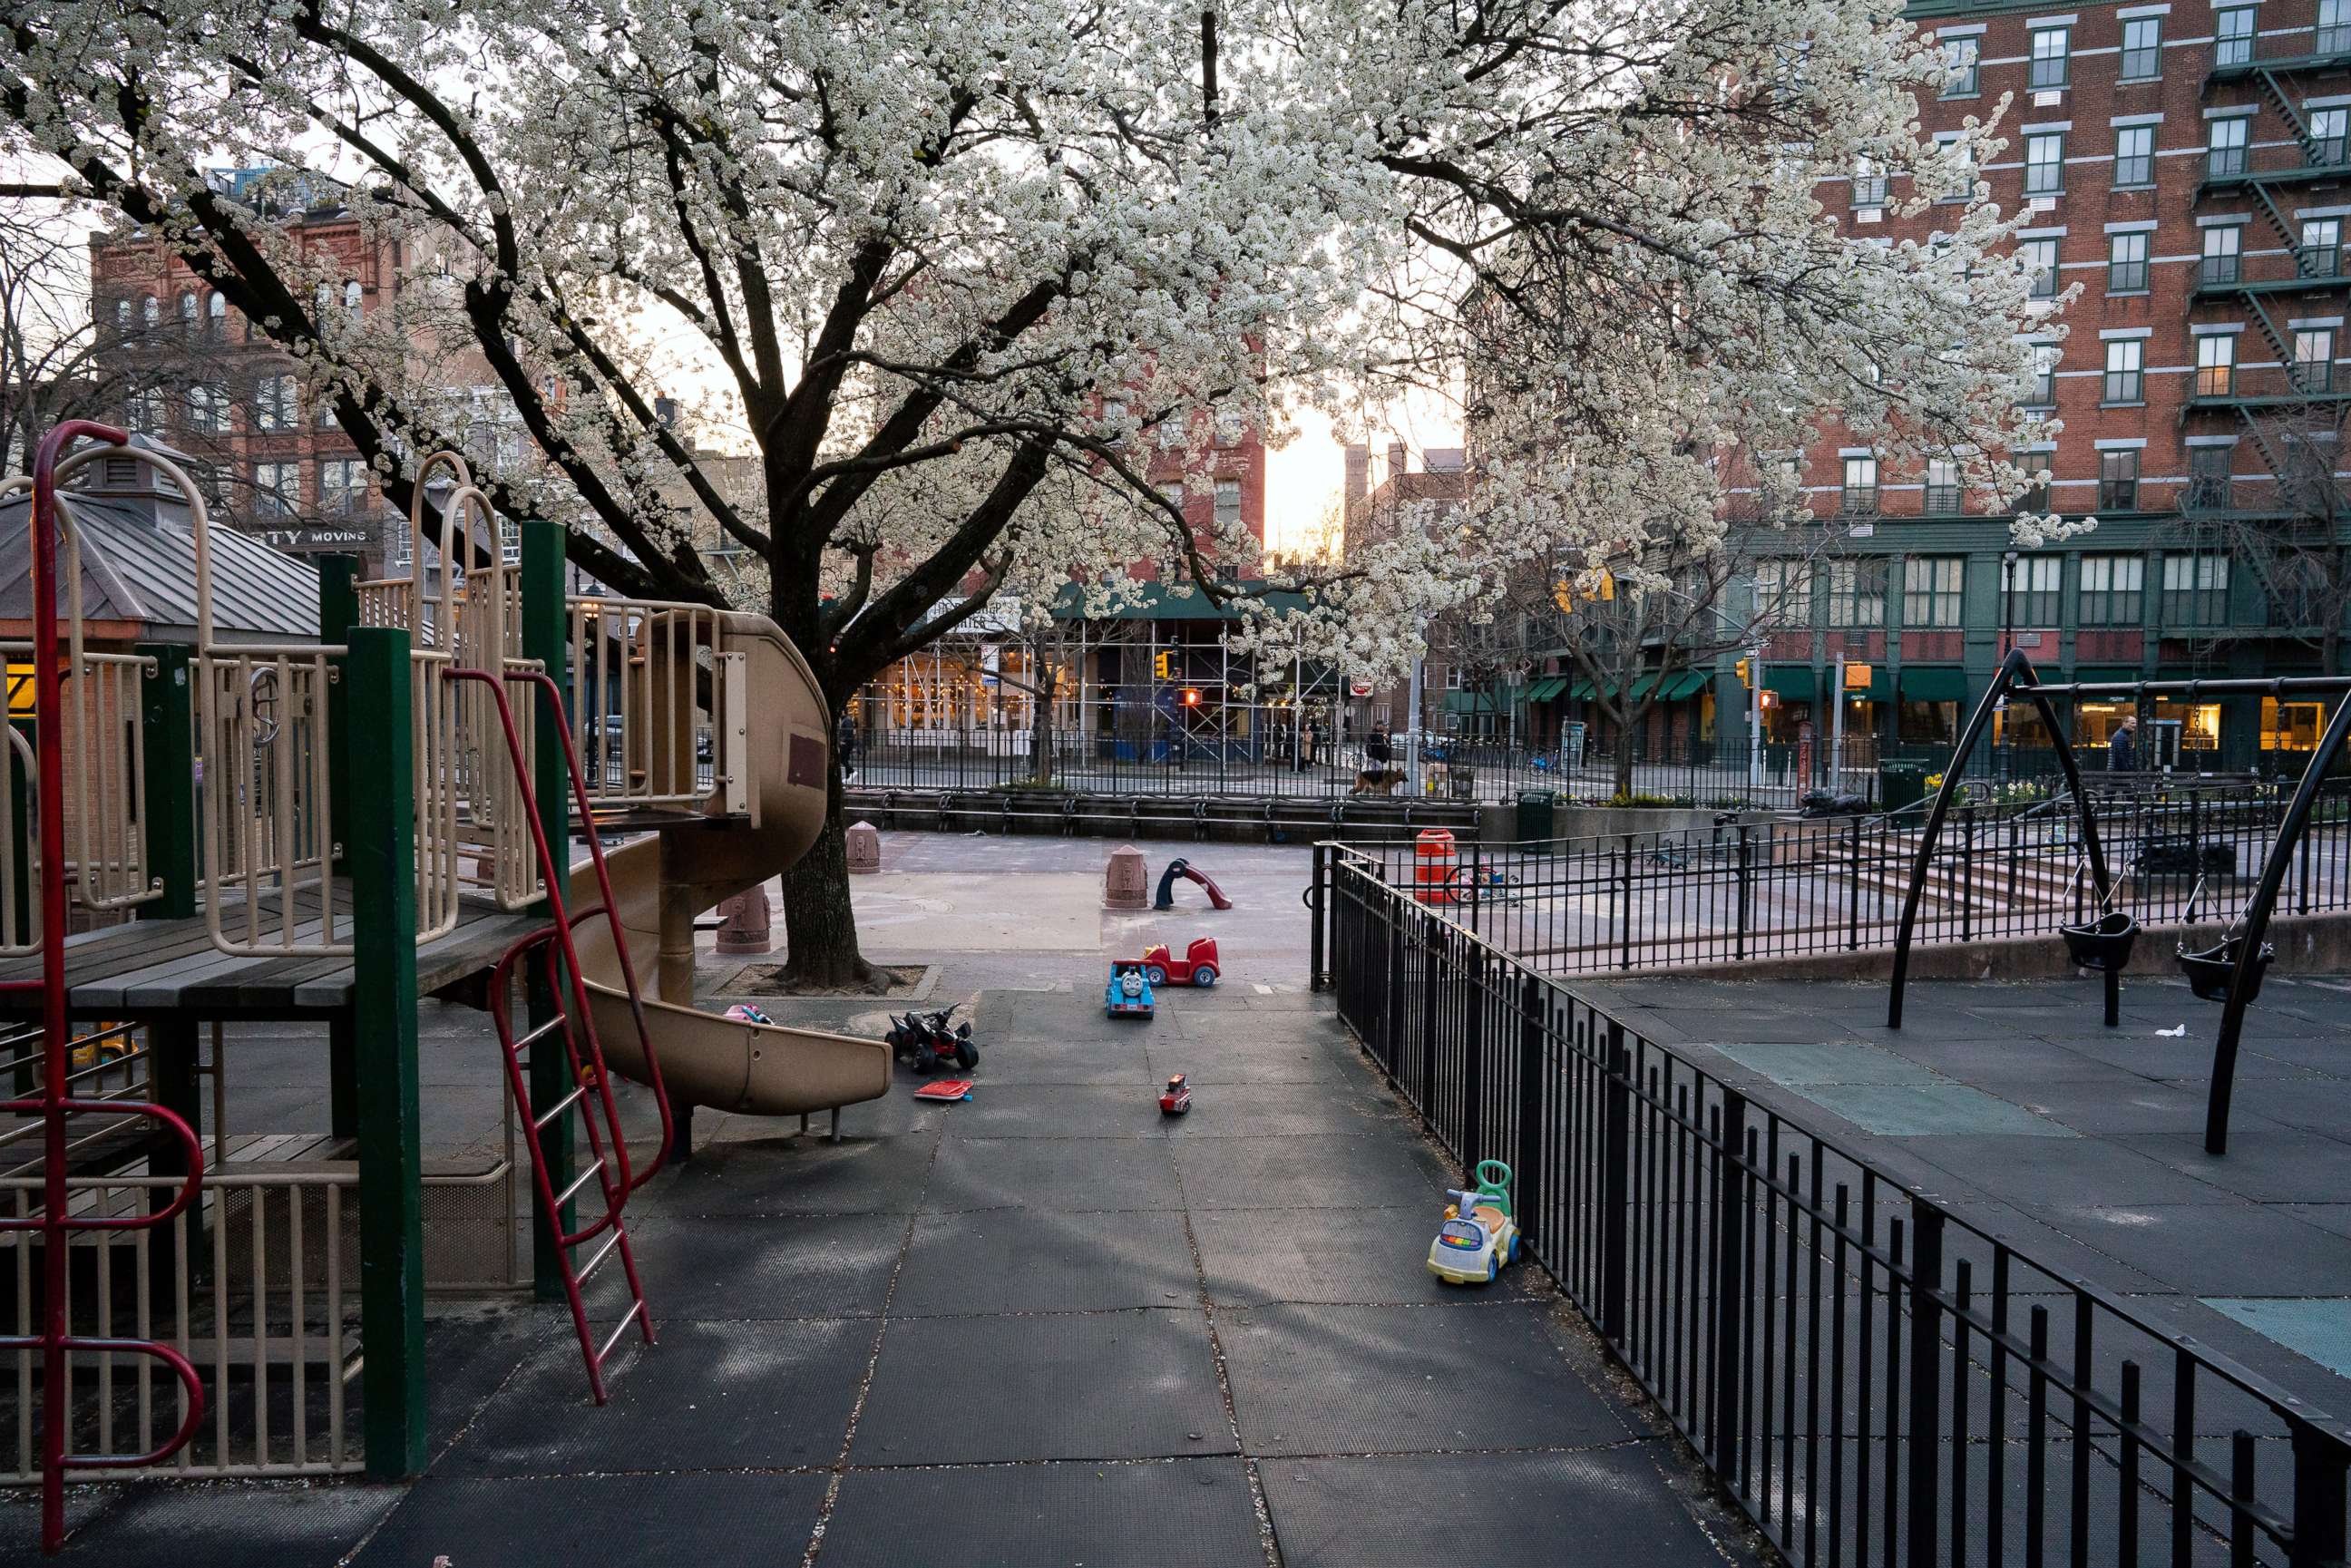 PHOTO: A desolate playground in the West Village neighborhood of Manhattan on March 27, 2020.